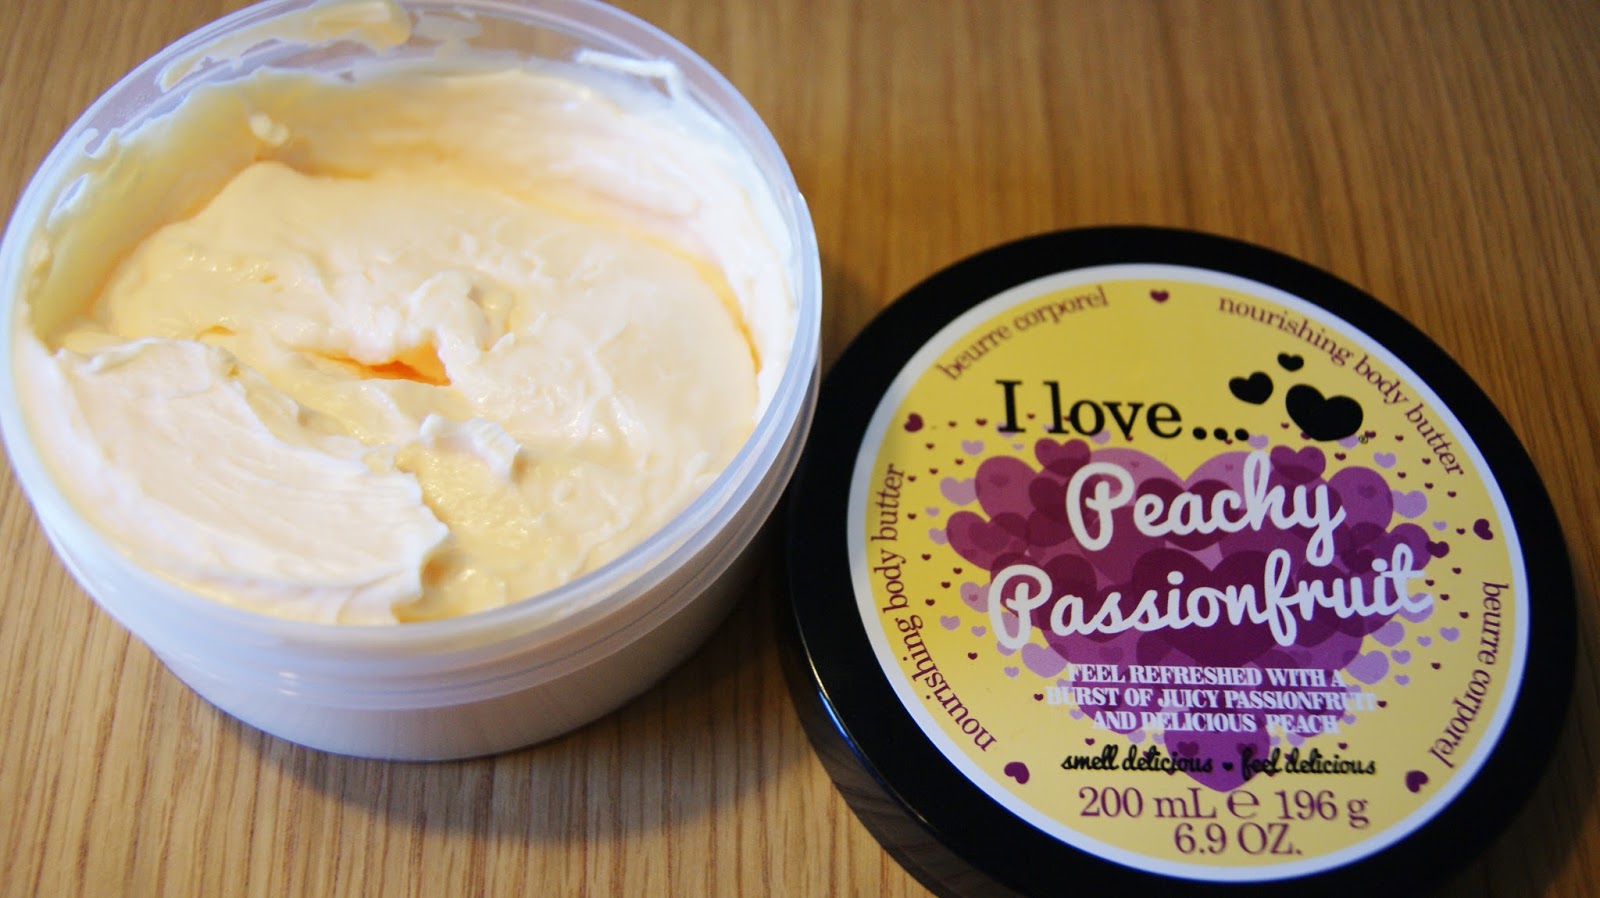 I Love Peachy Passionfruit Body Butter